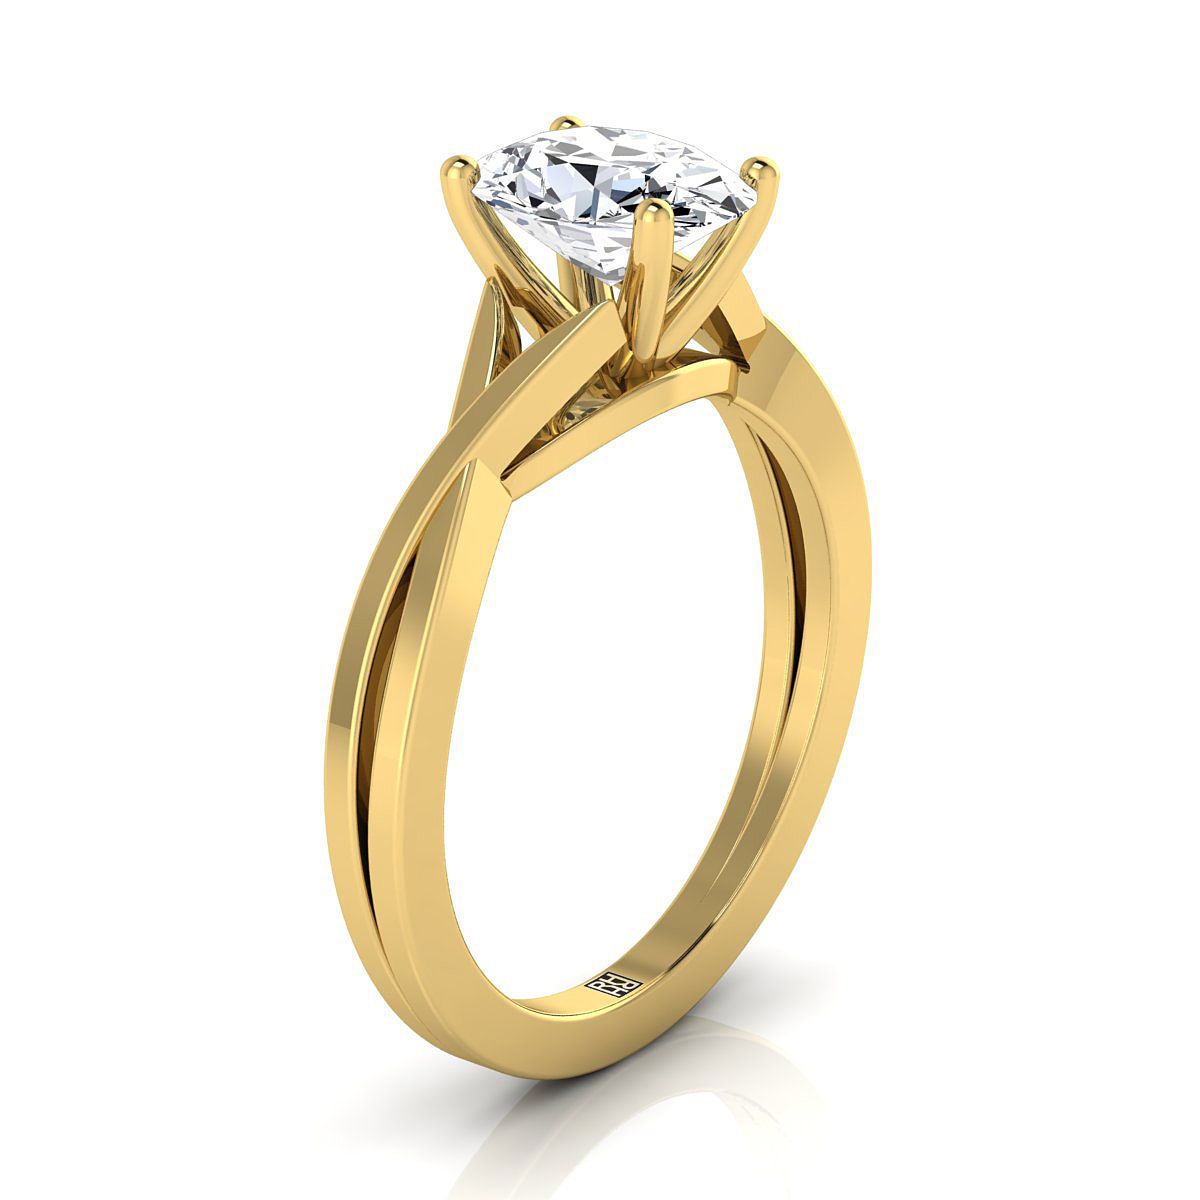 18K Yellow Gold Oval Delicate Twist Solitaire Engagement Ring